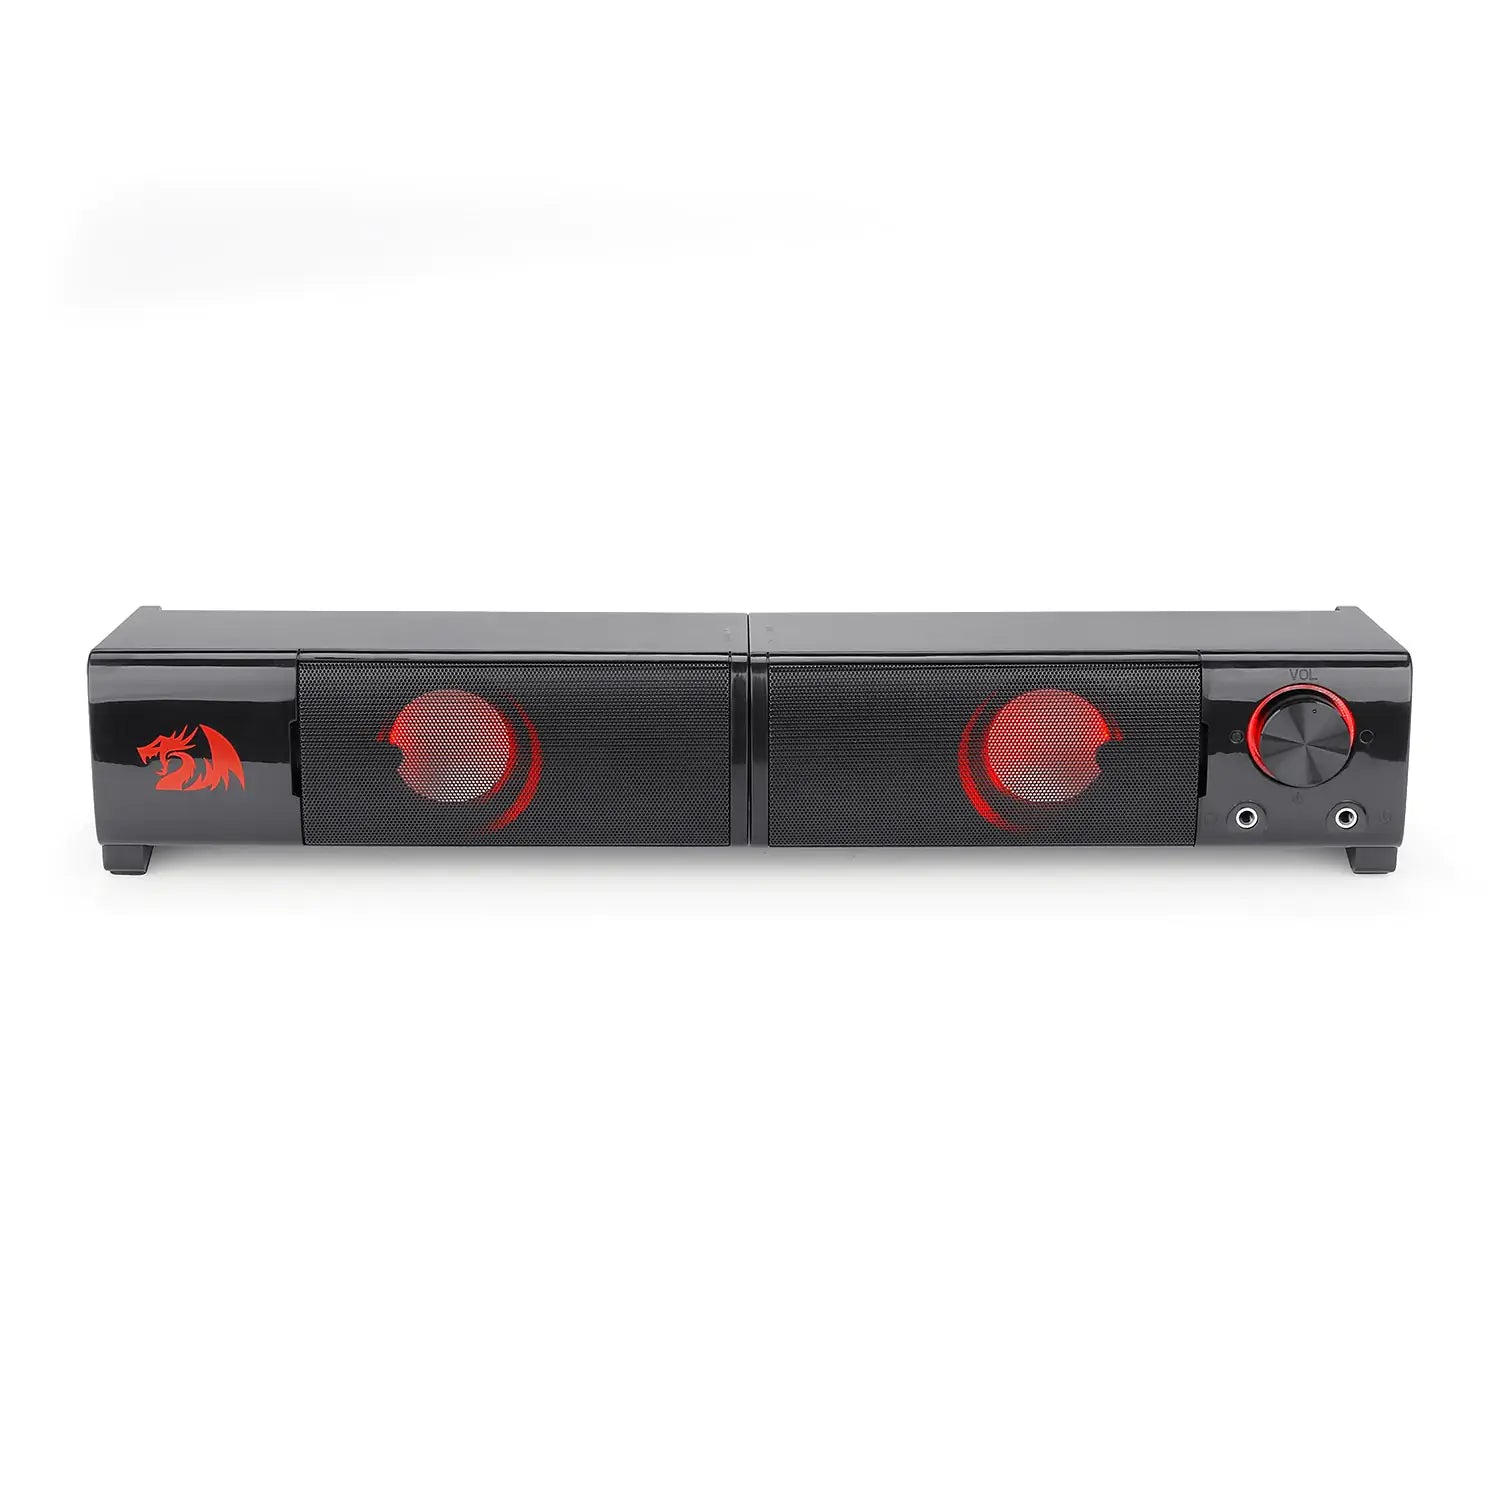 Redragon GS550 Orpheus PC Gaming Speakers, 2.0 Channel Stereo Desktop Computer Sound Bar with Compact Maneuverable Size, Headphone Jack, Quality Bass